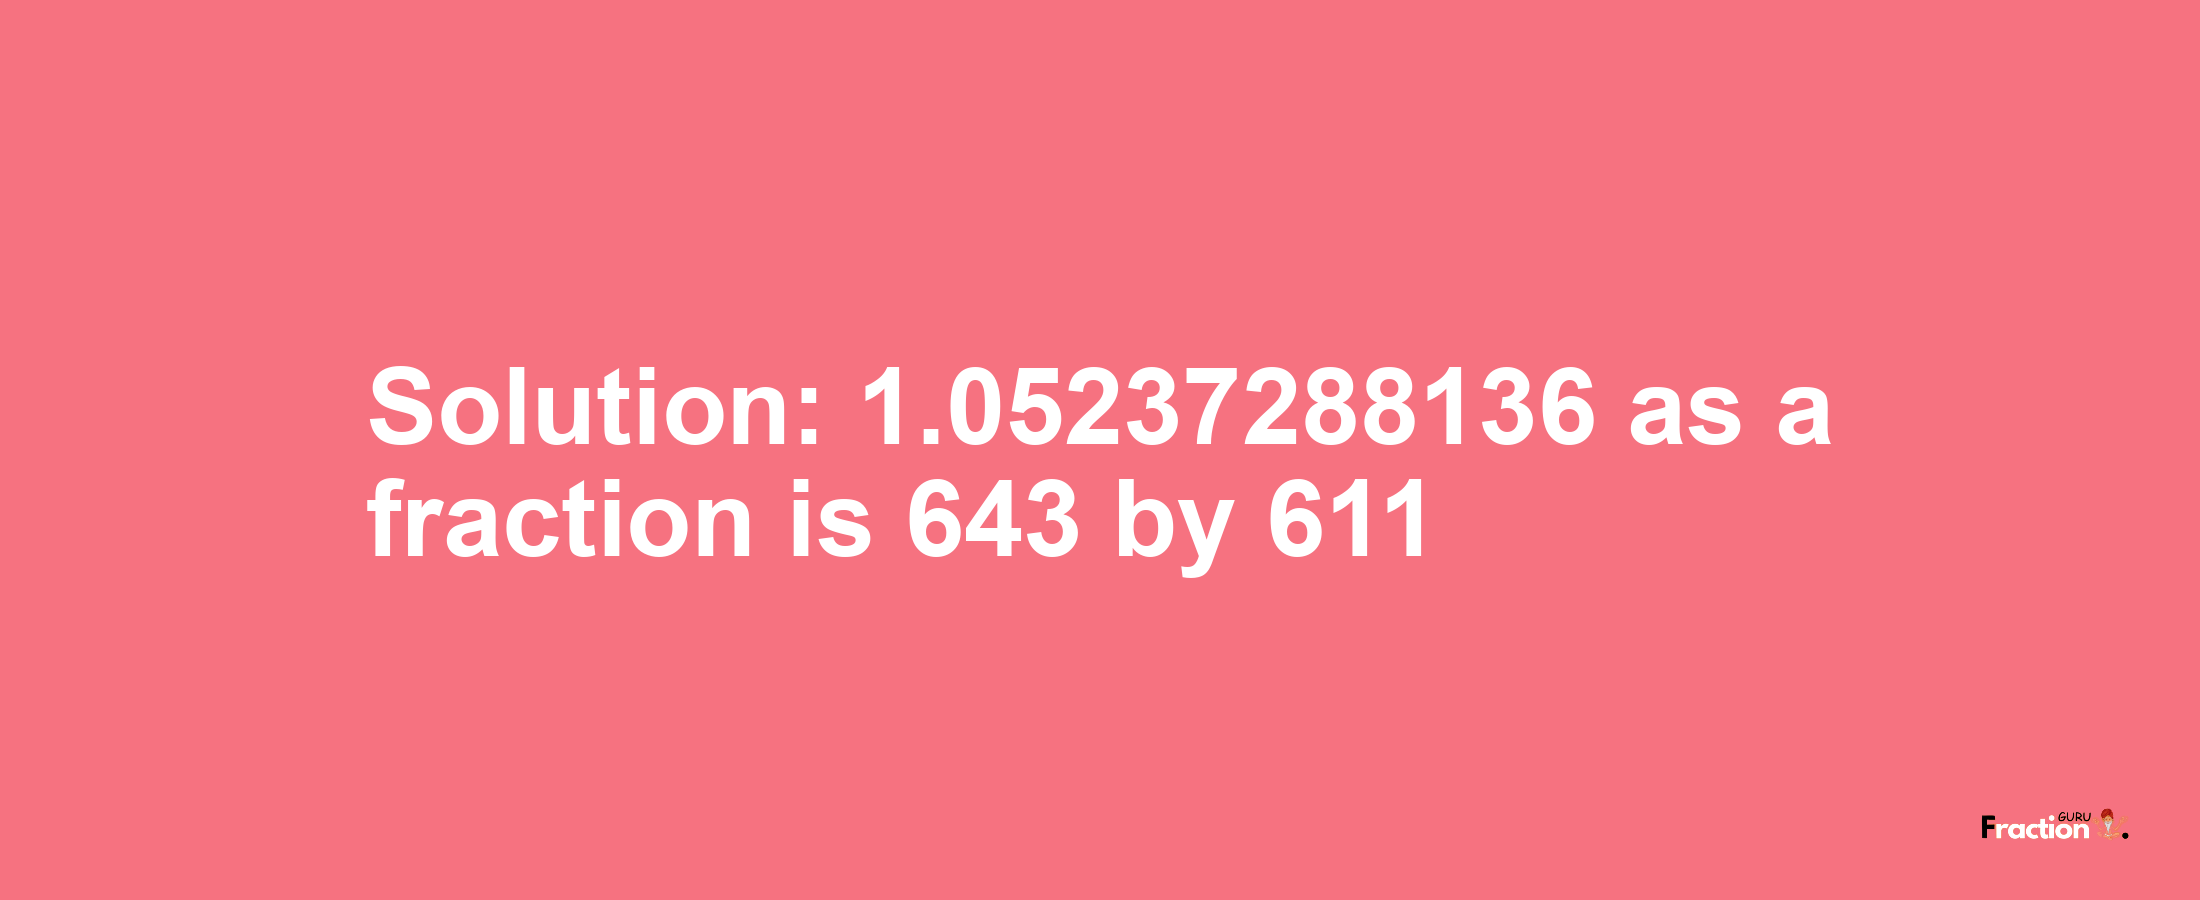 Solution:1.05237288136 as a fraction is 643/611